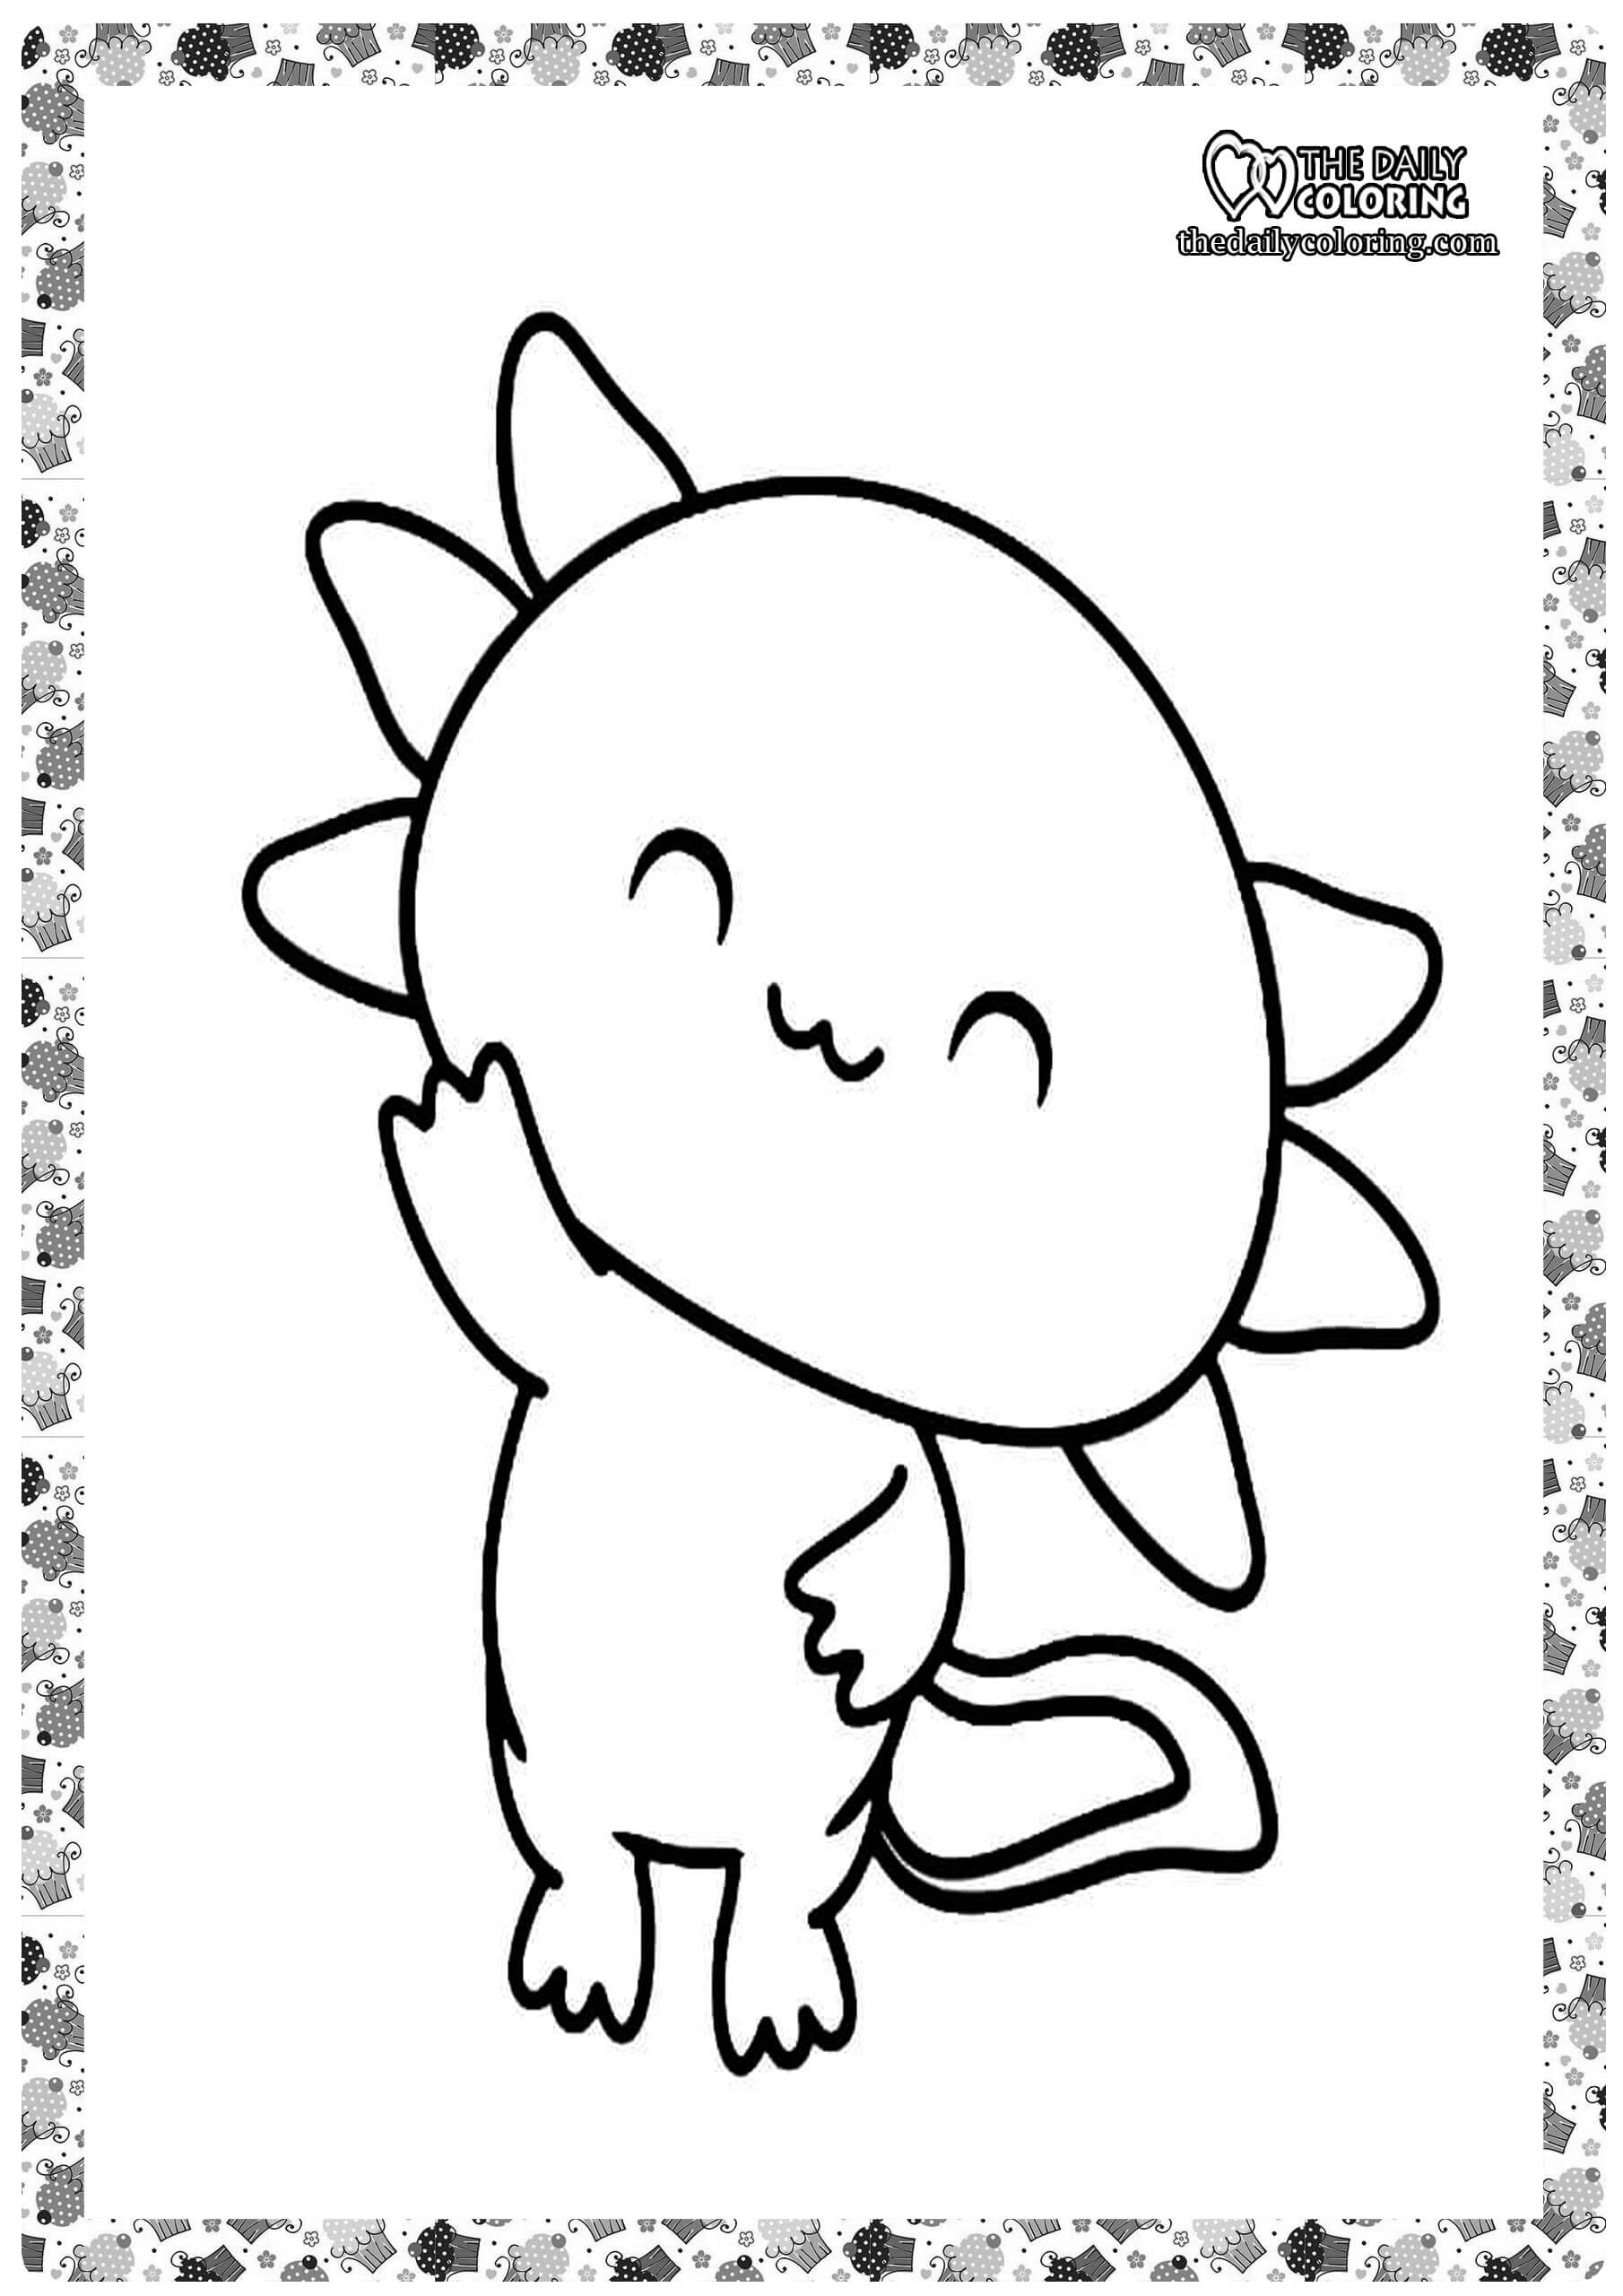 Axolotl Coloring Pages   The Daily Coloring